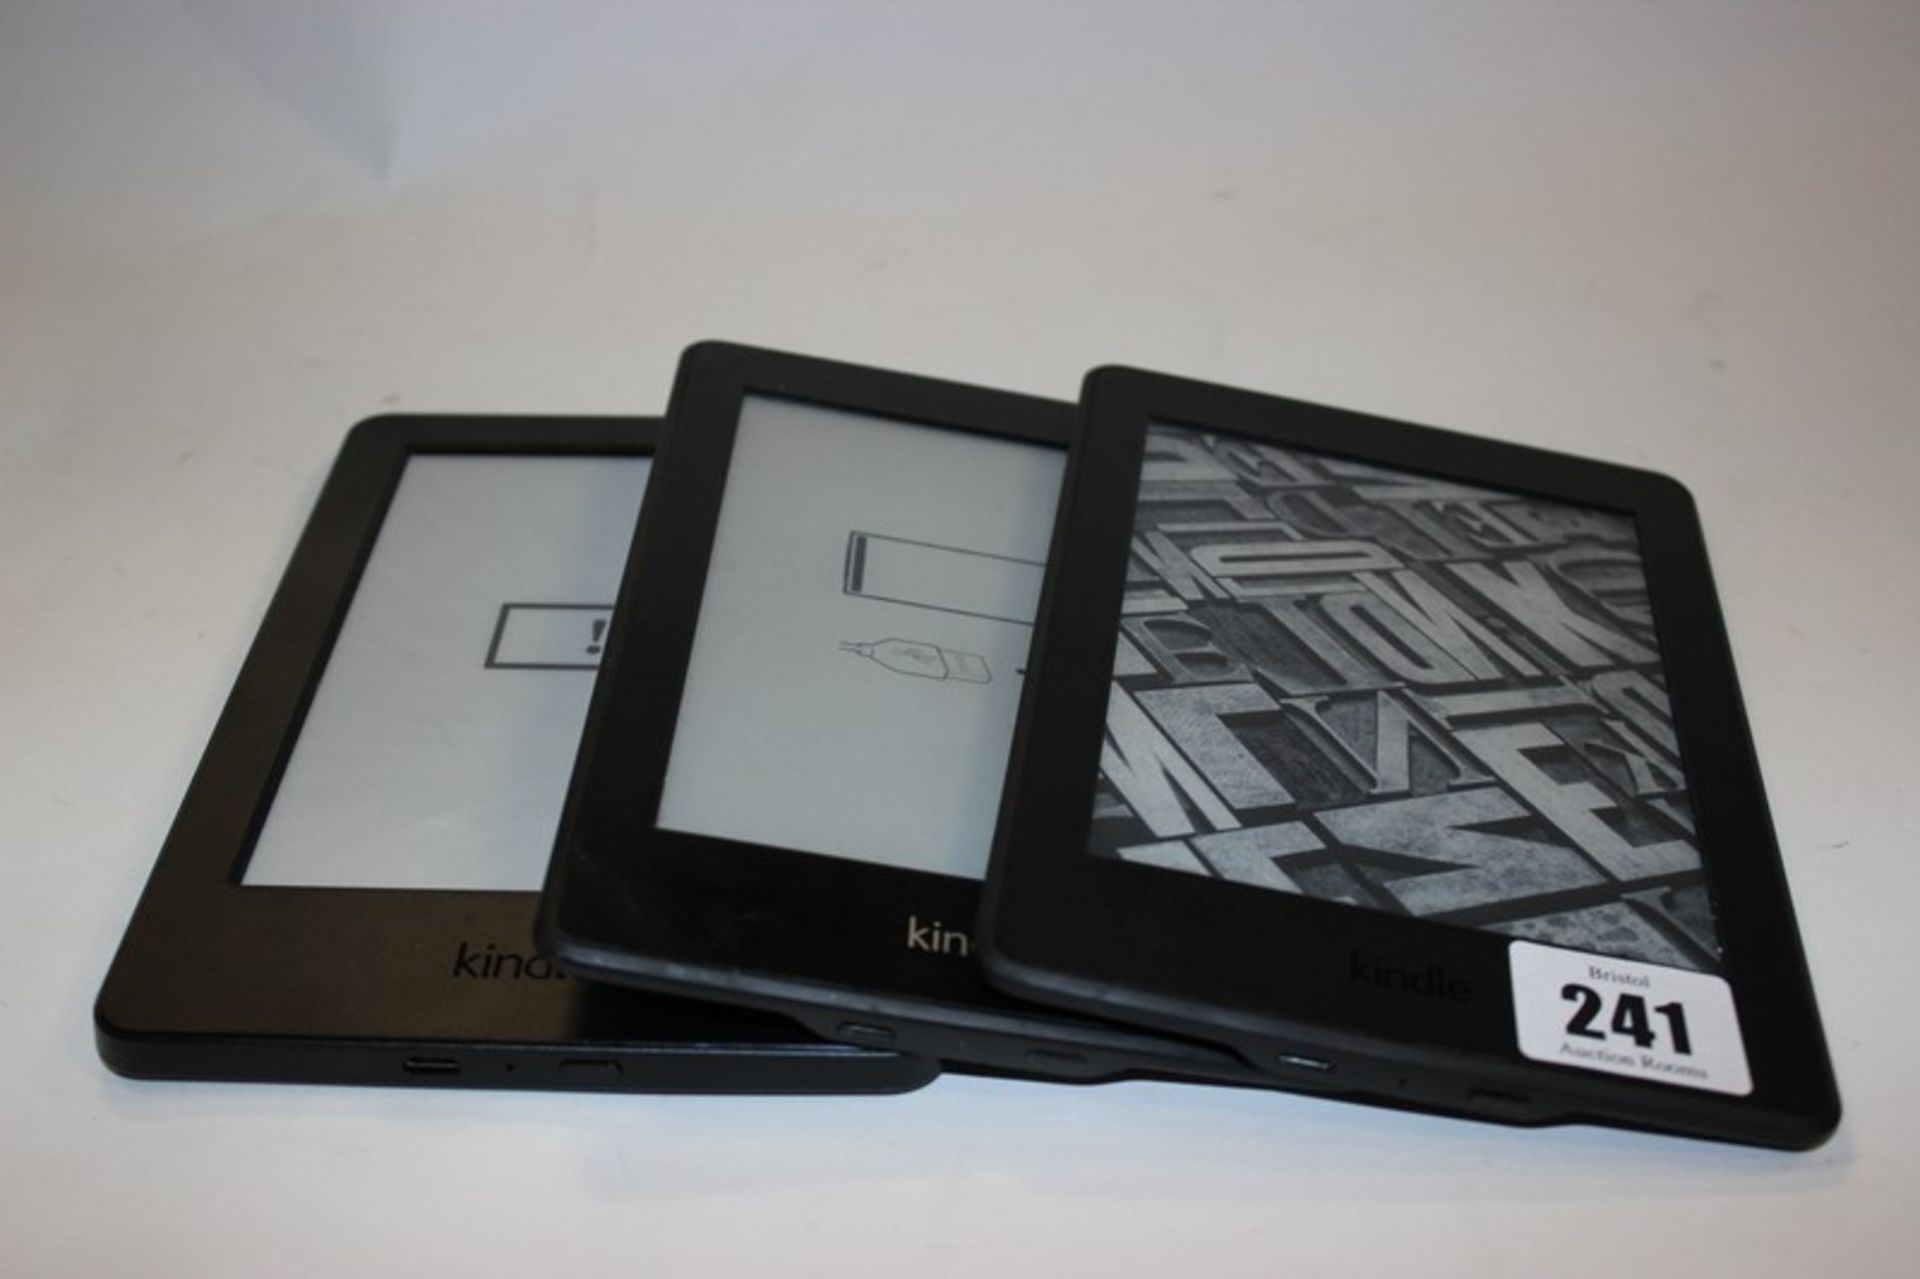 A Kindle Paperwhite 3G and WI-FI model: EY21, Kindle Paperwhite 3 (2015) model: DP75SDI and a Kindle